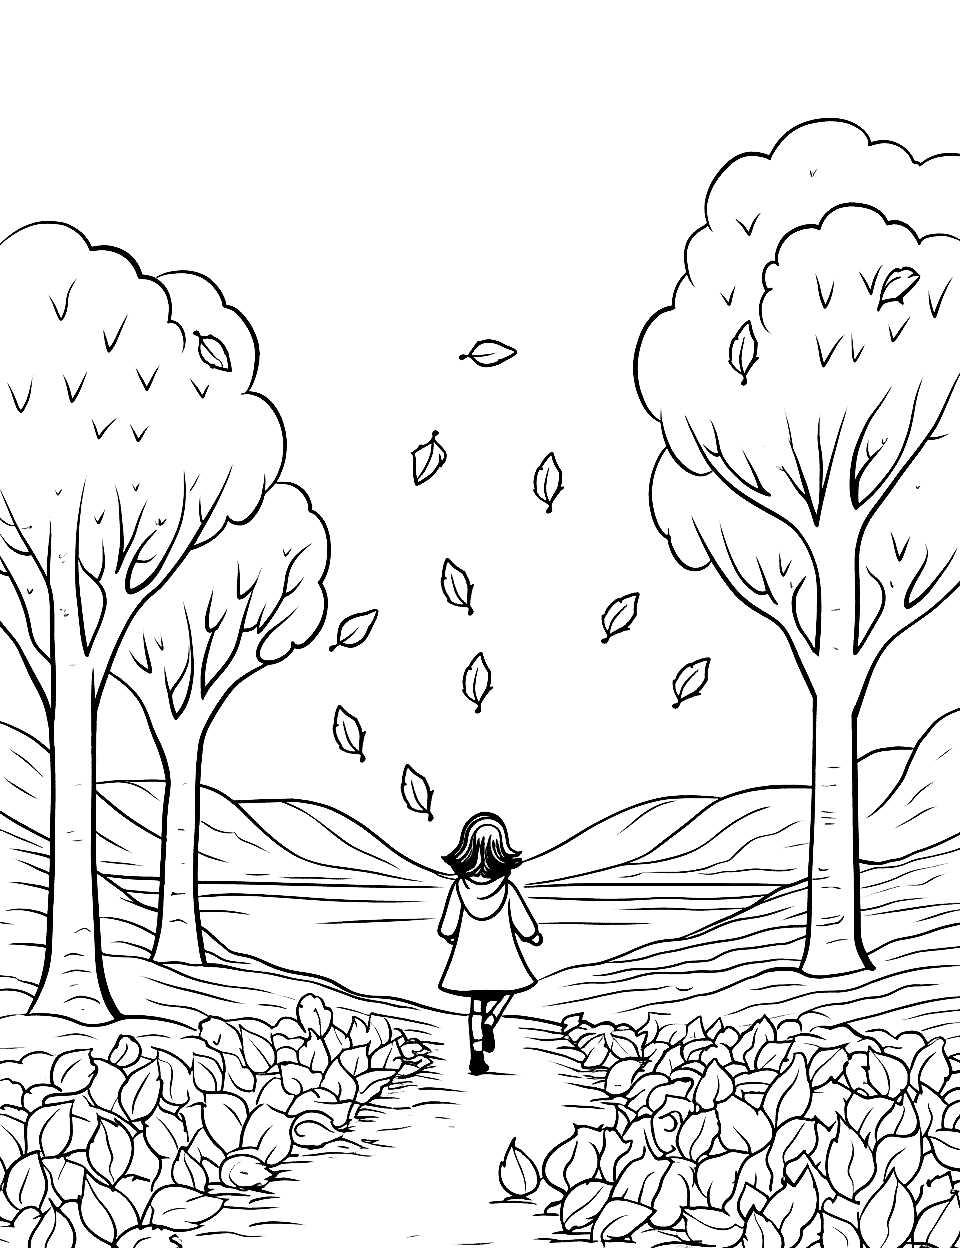 Autumn Leaves Falling Coloring Page - A scene of autumn trees with leaves falling gently to the ground.